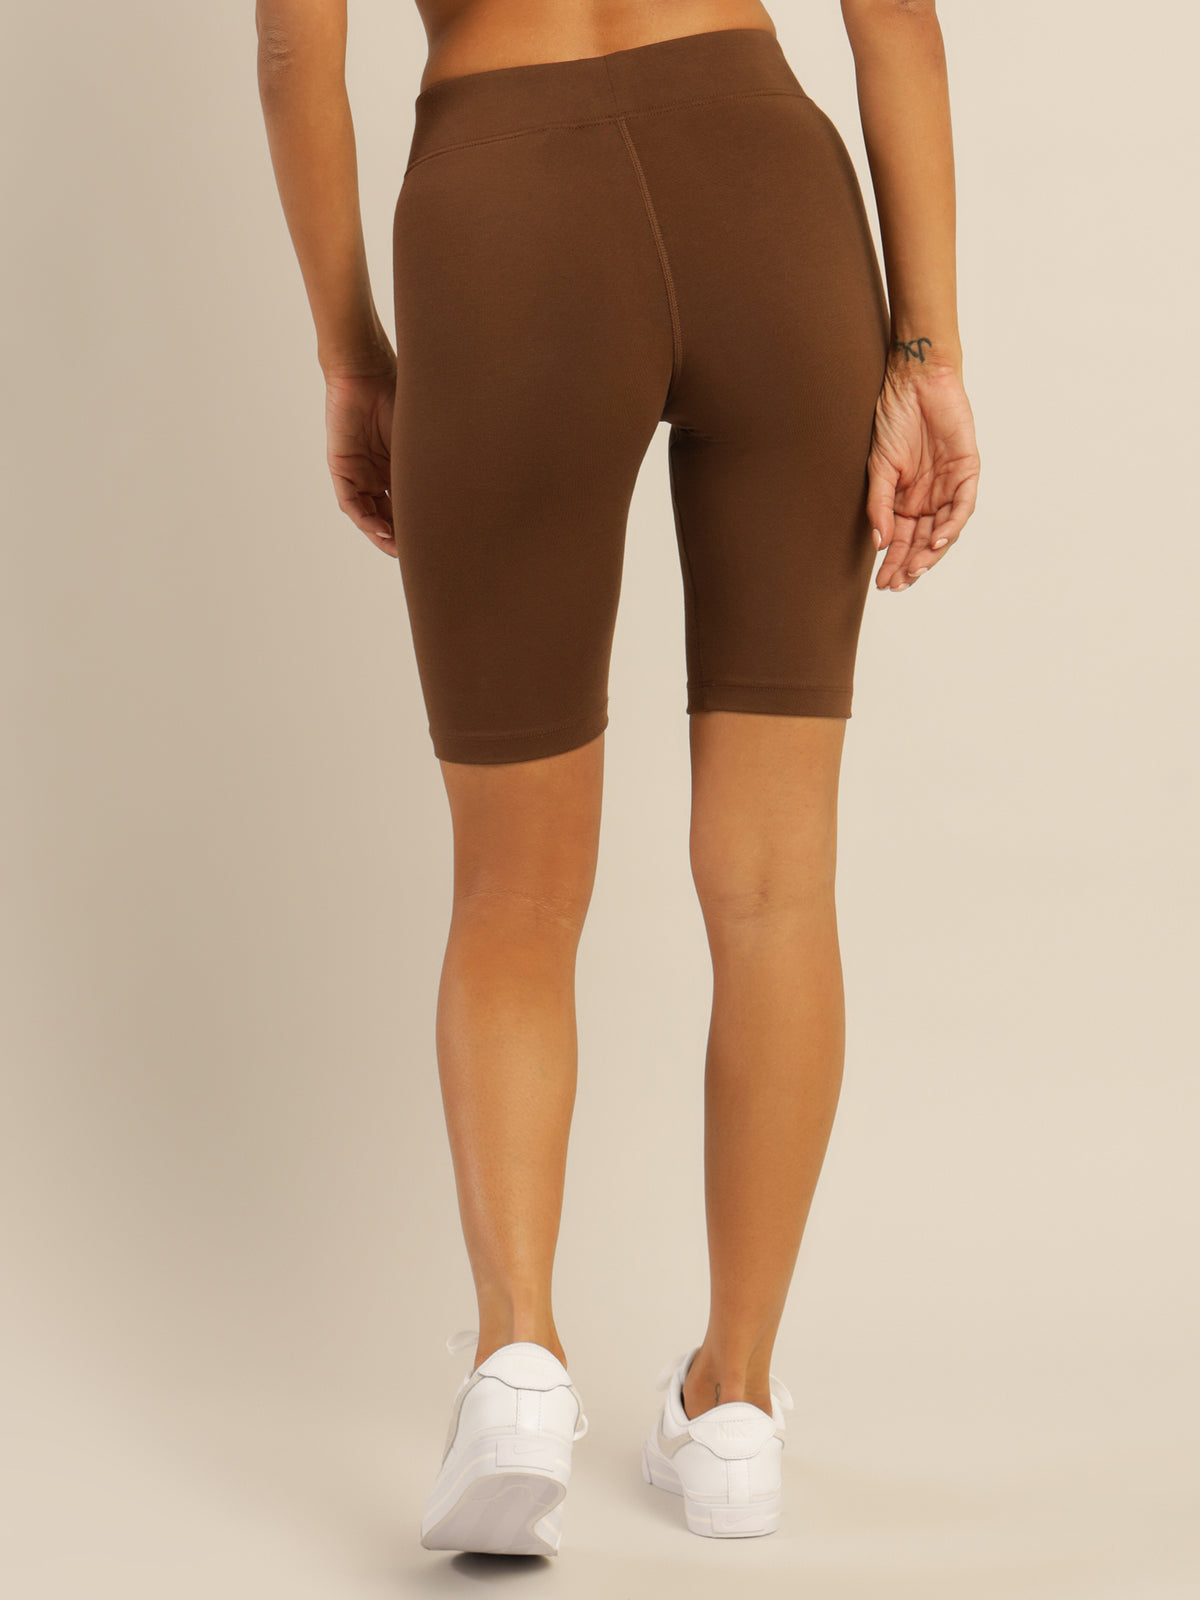 Sportswear Essential Mid-Rise Bike Shorts in Cacao Wow